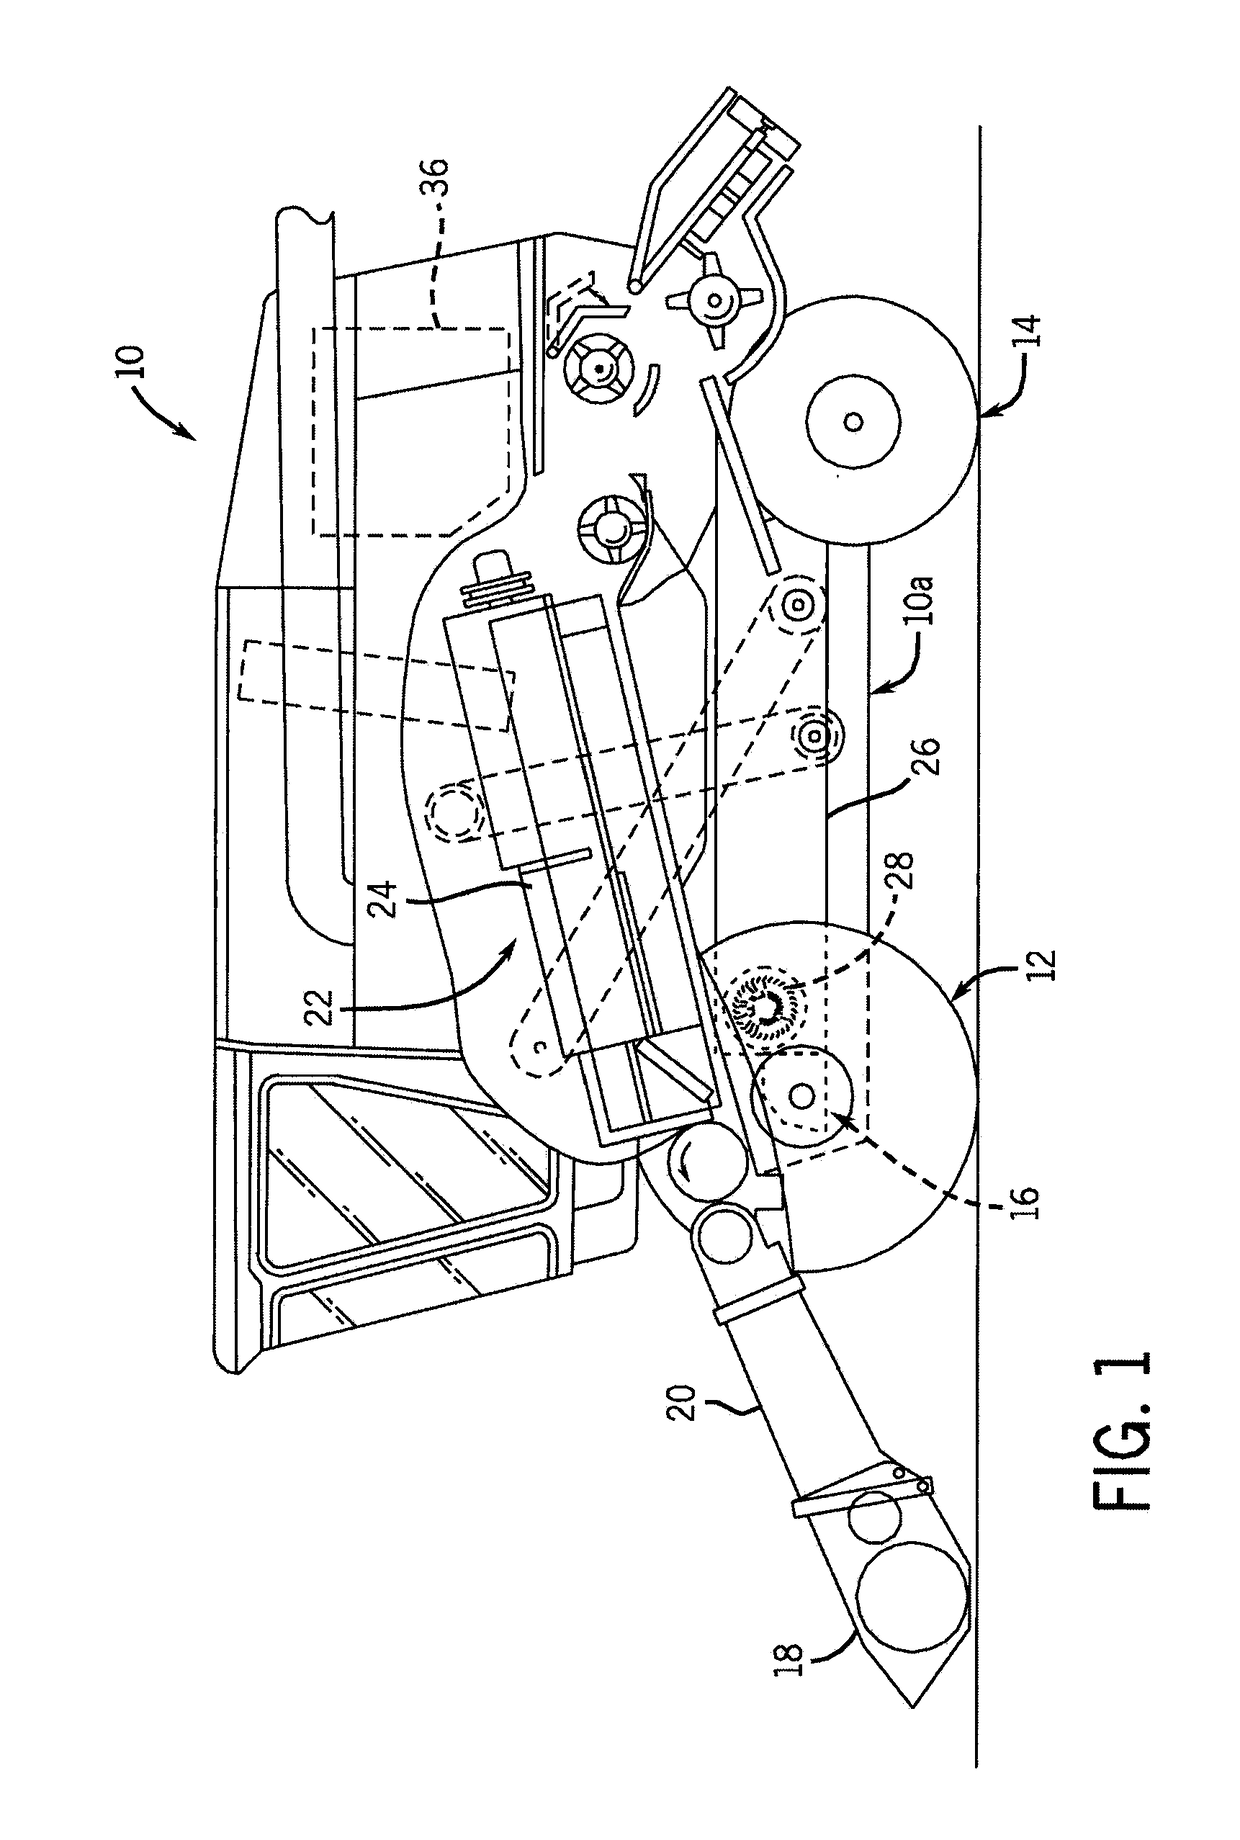 Integrated fan and axle arrangement for an agricultural vehicle